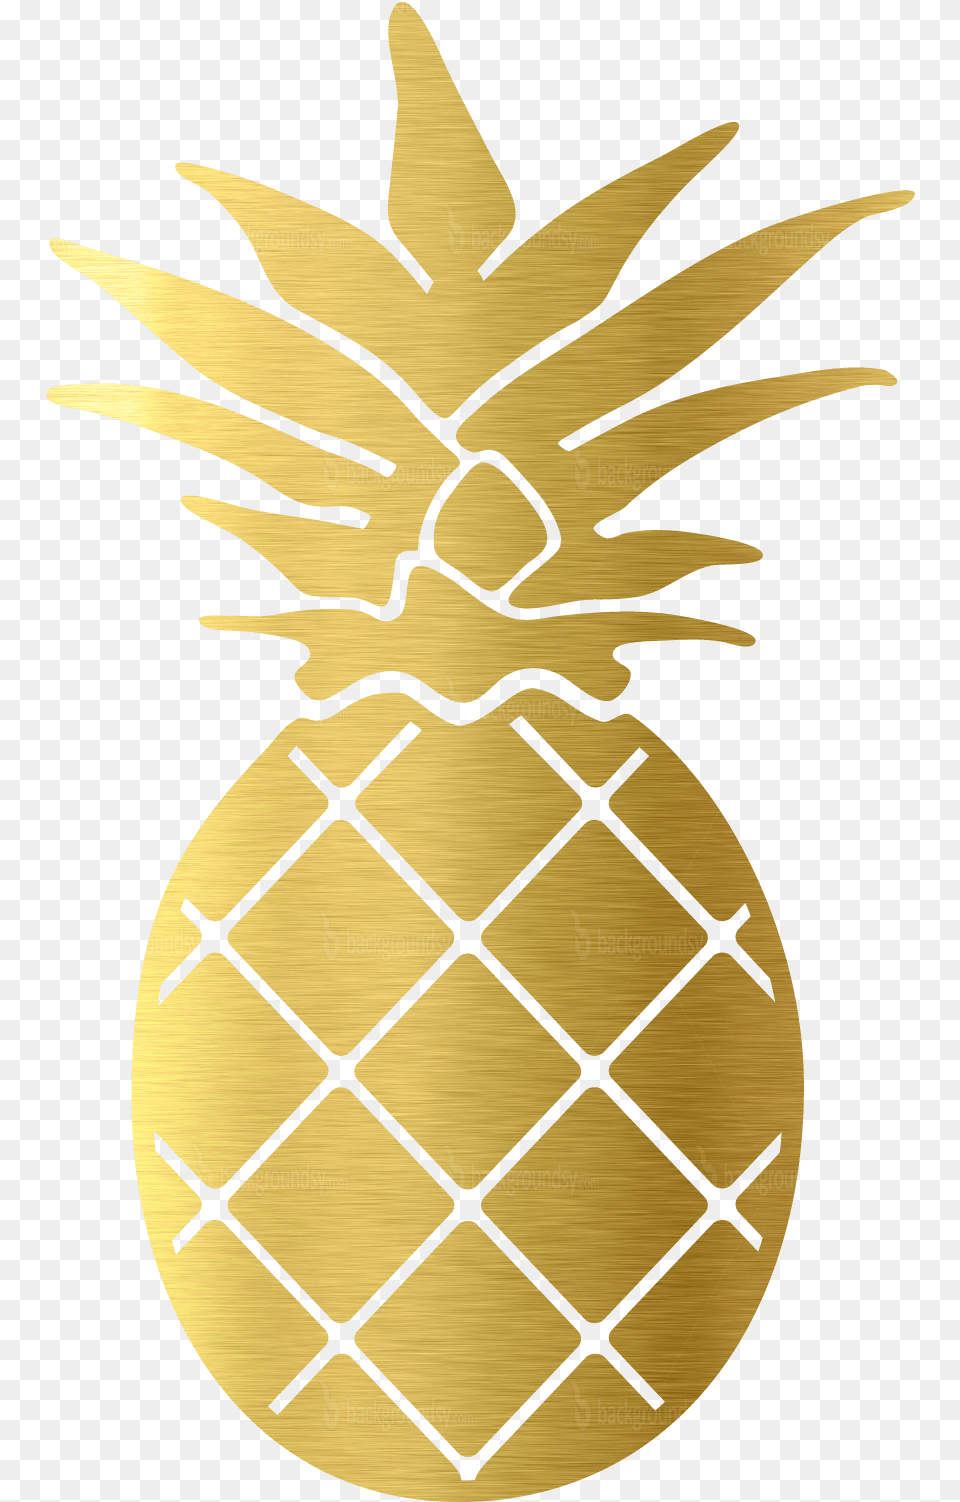 Pineapple Decal Sticker Clip Art Pineapple Decal, Food, Fruit, Plant, Produce Free Png Download